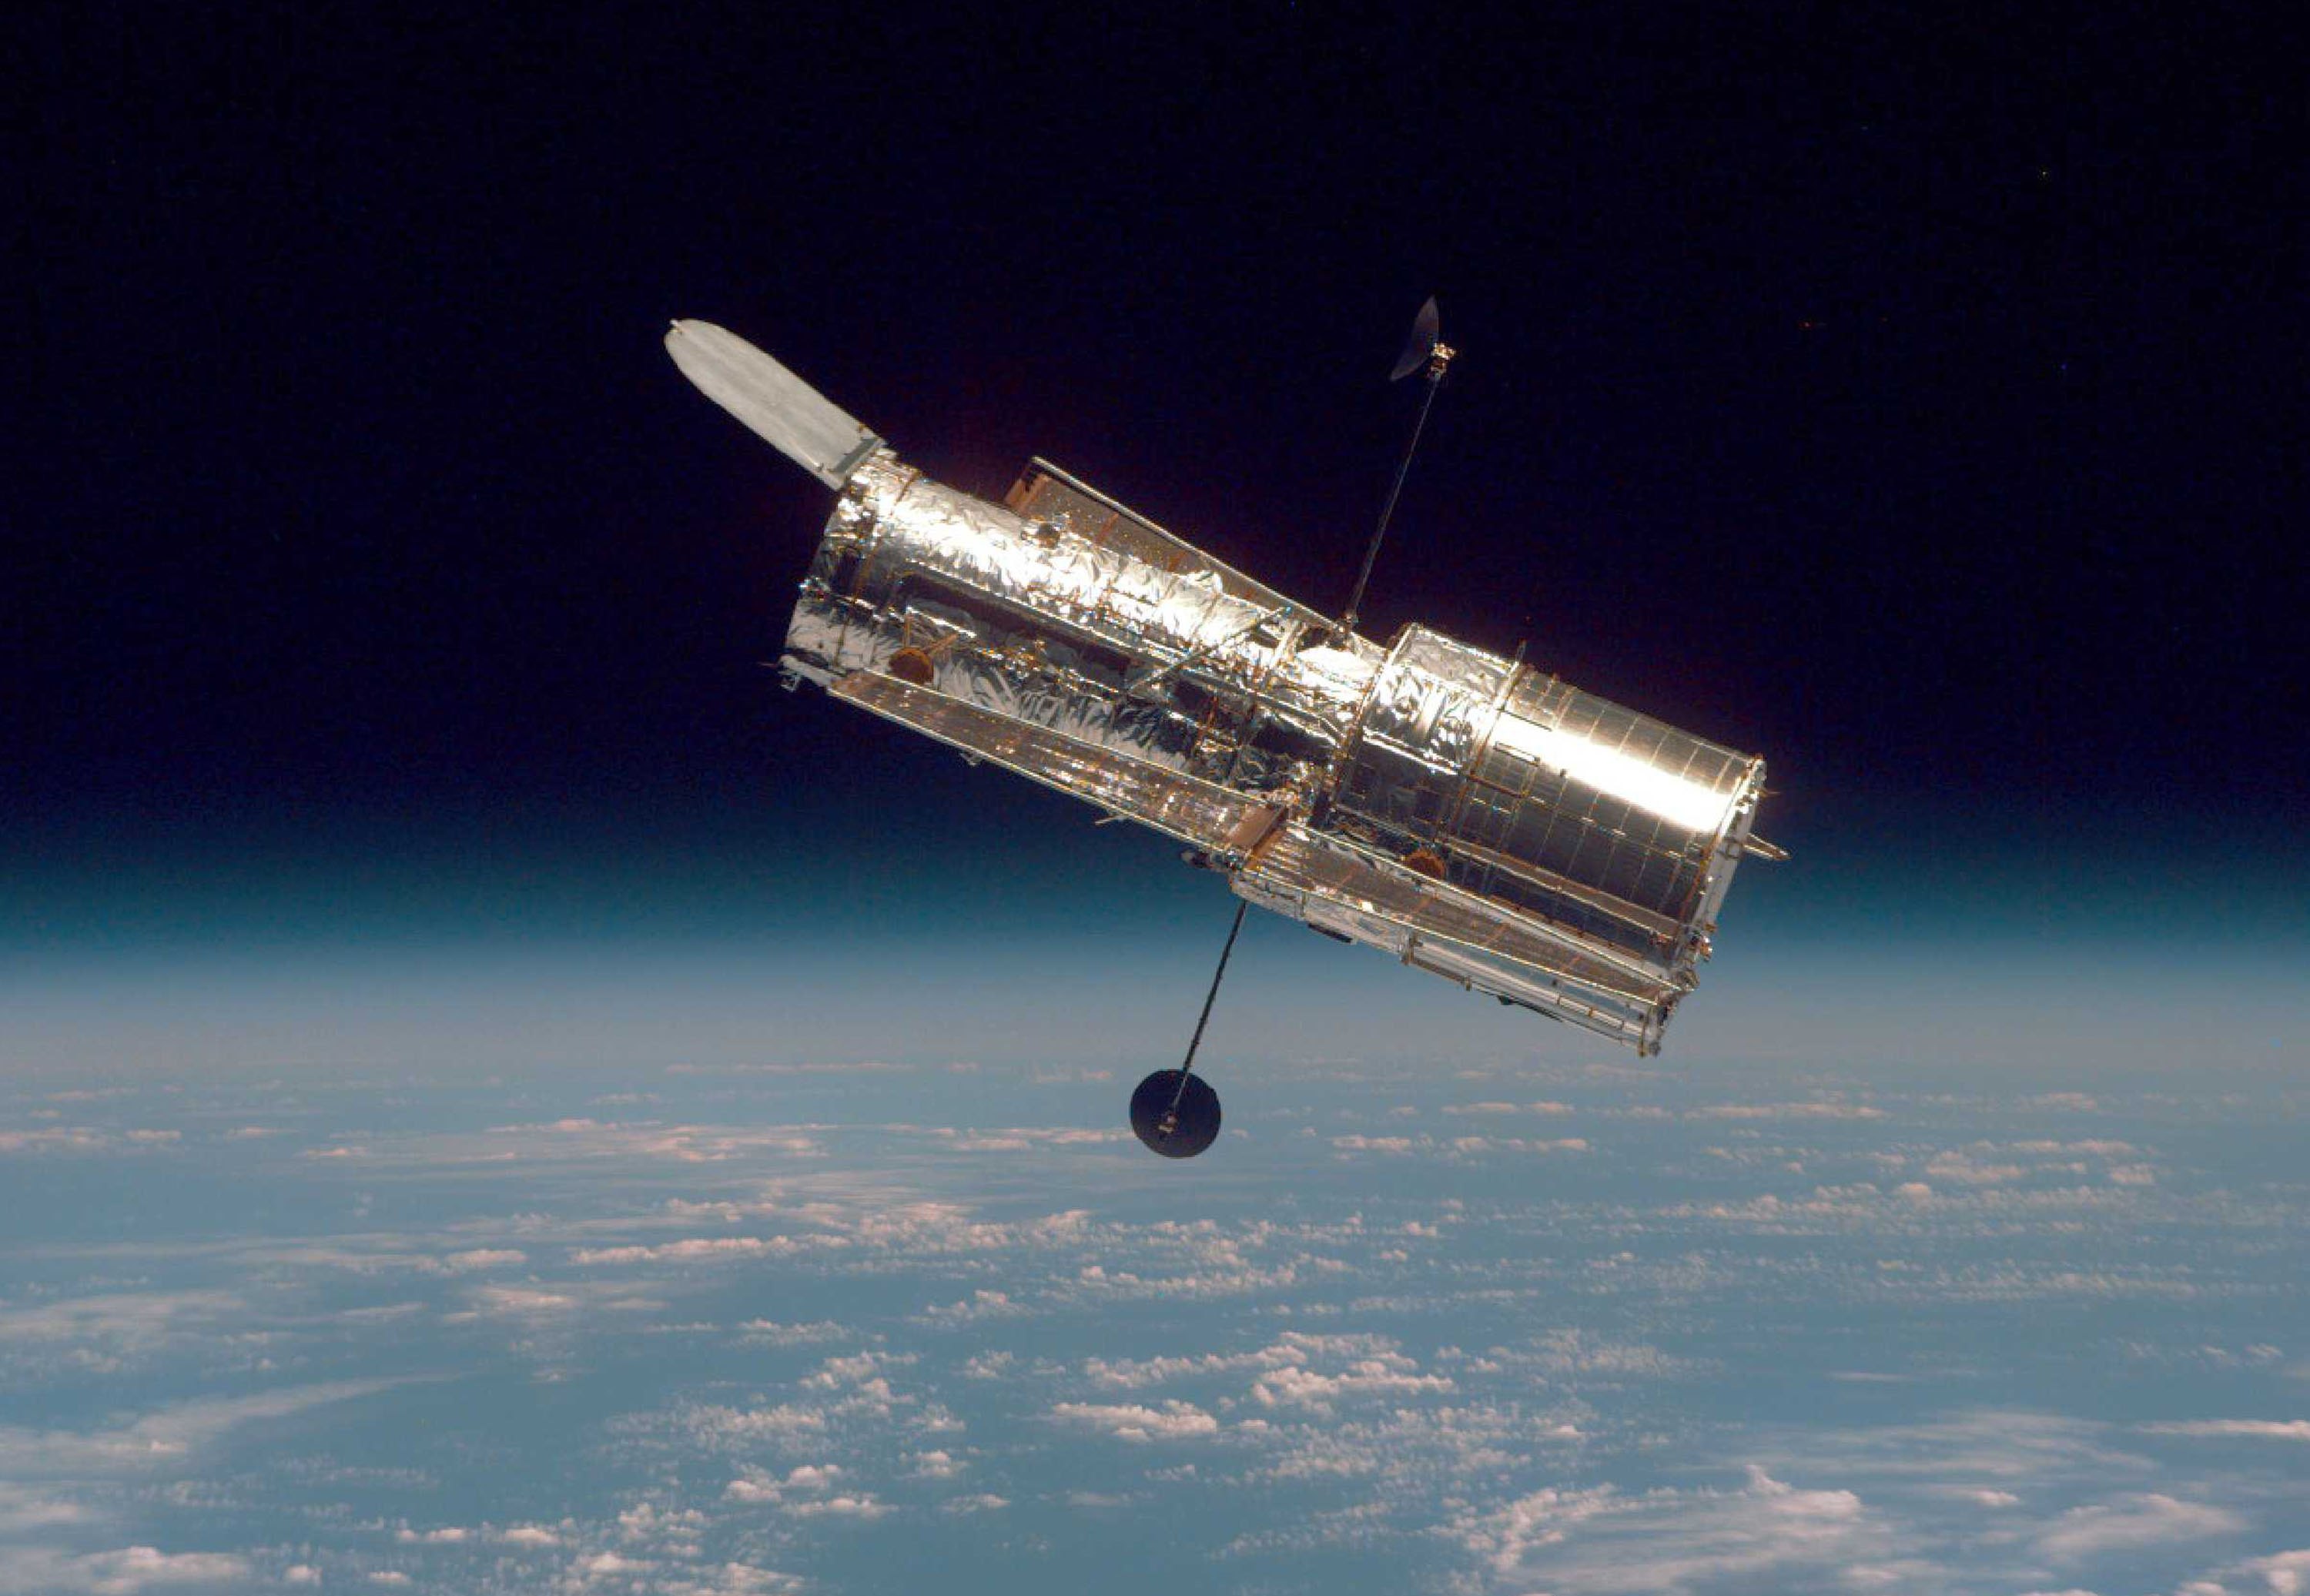 The iconic Hubble Space Telescope.